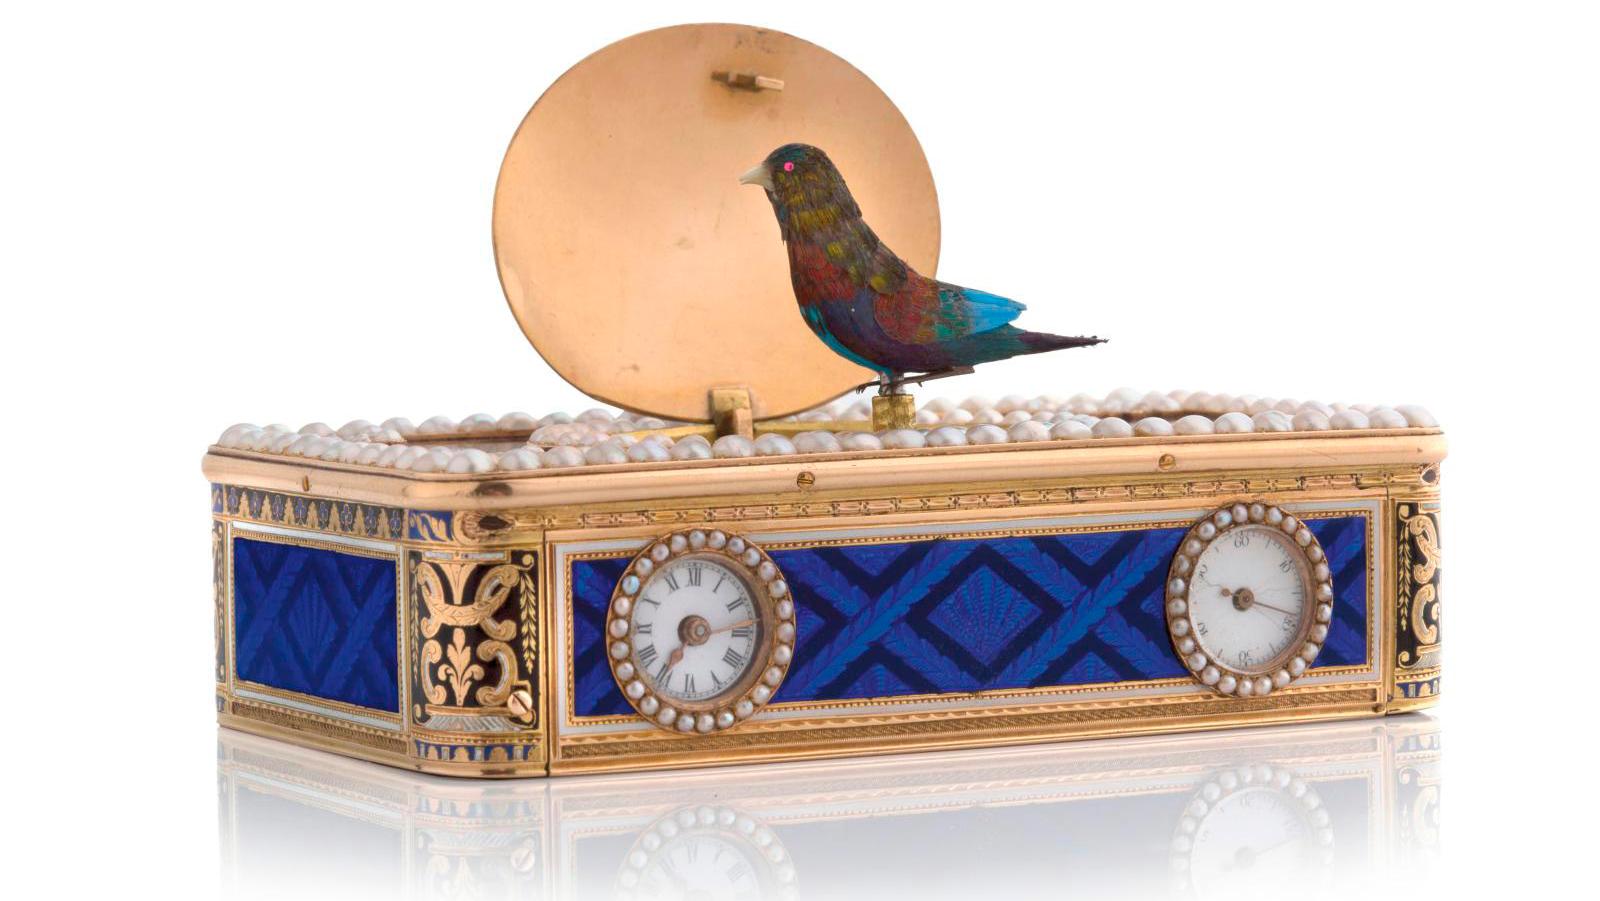 Swiss work attributed to the Rochat brothers with the hallmark of Jean-Georges Rémond,... Watch Collection: A Singing Bird and Precious Timepiece